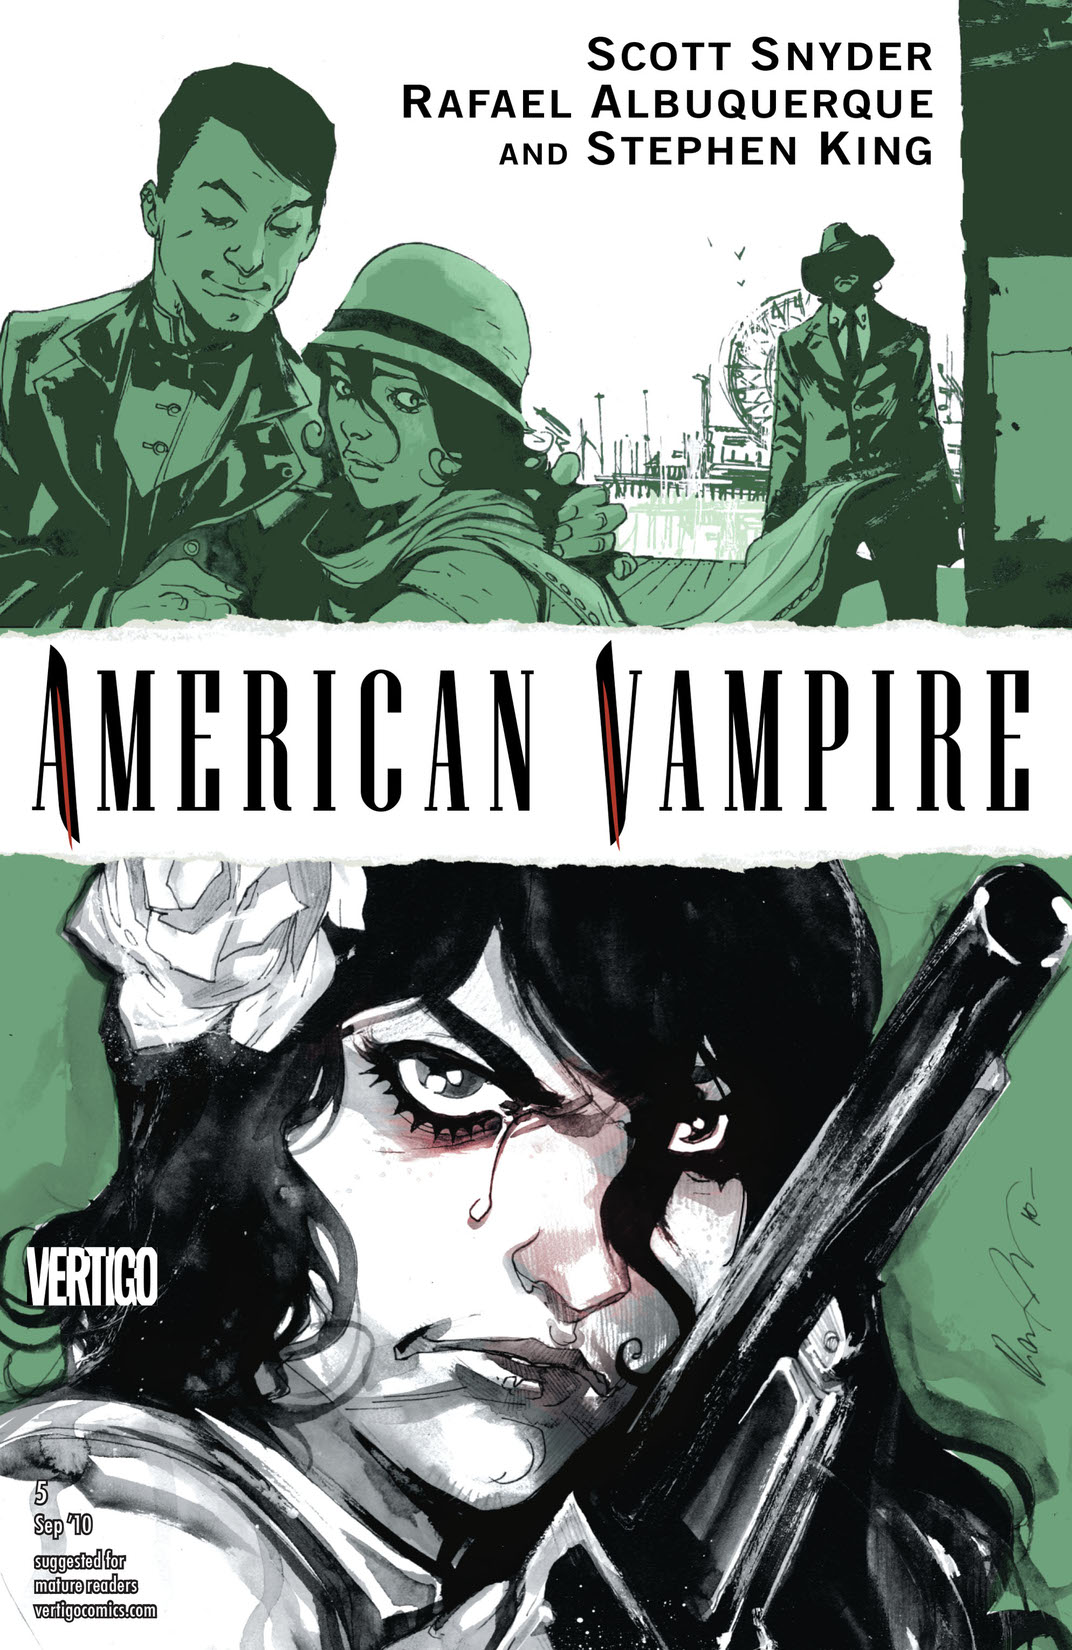 American Vampire #5 preview images